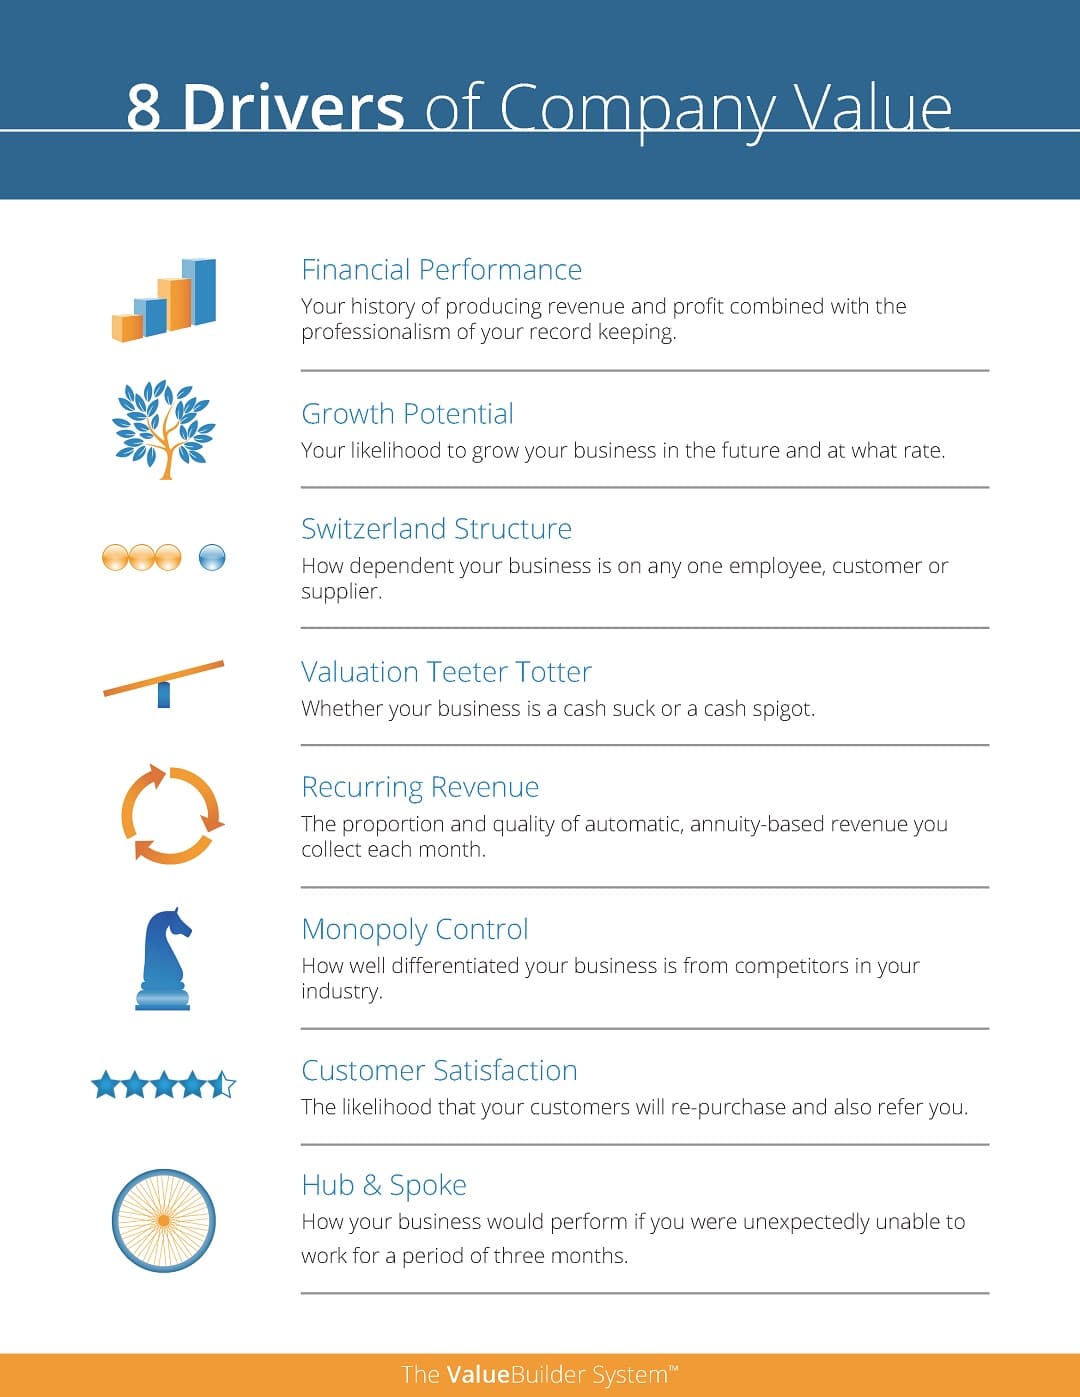 Summary 8 Drivers of Company Value Infographic